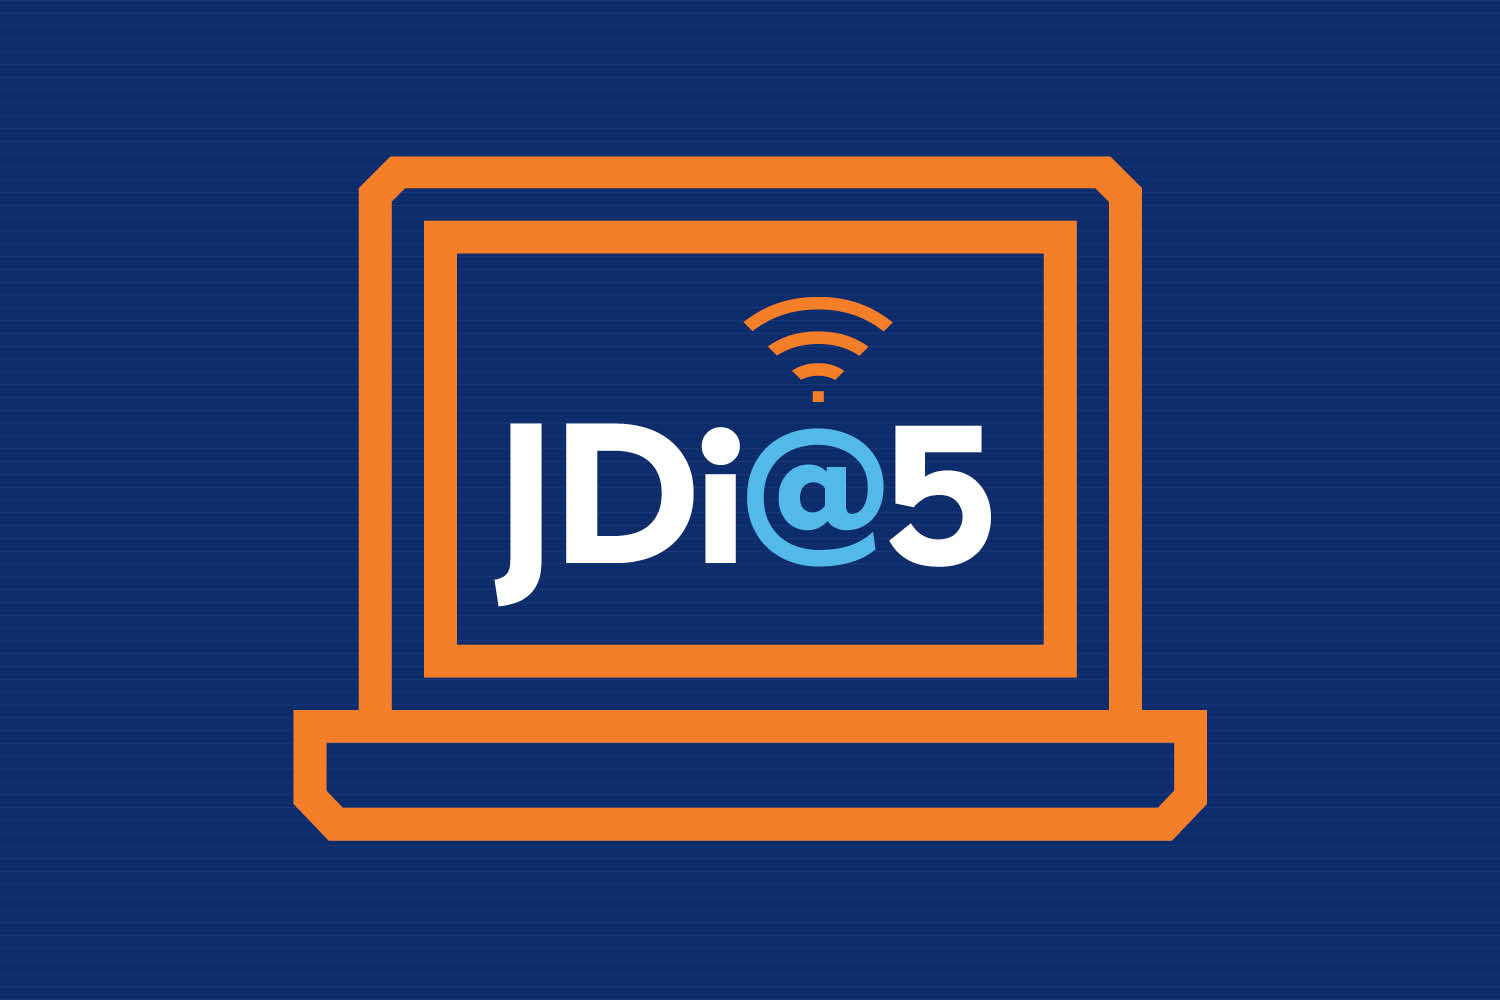 Jdi@5 header with blue background and an orange computer icon with an internet icon inside of it